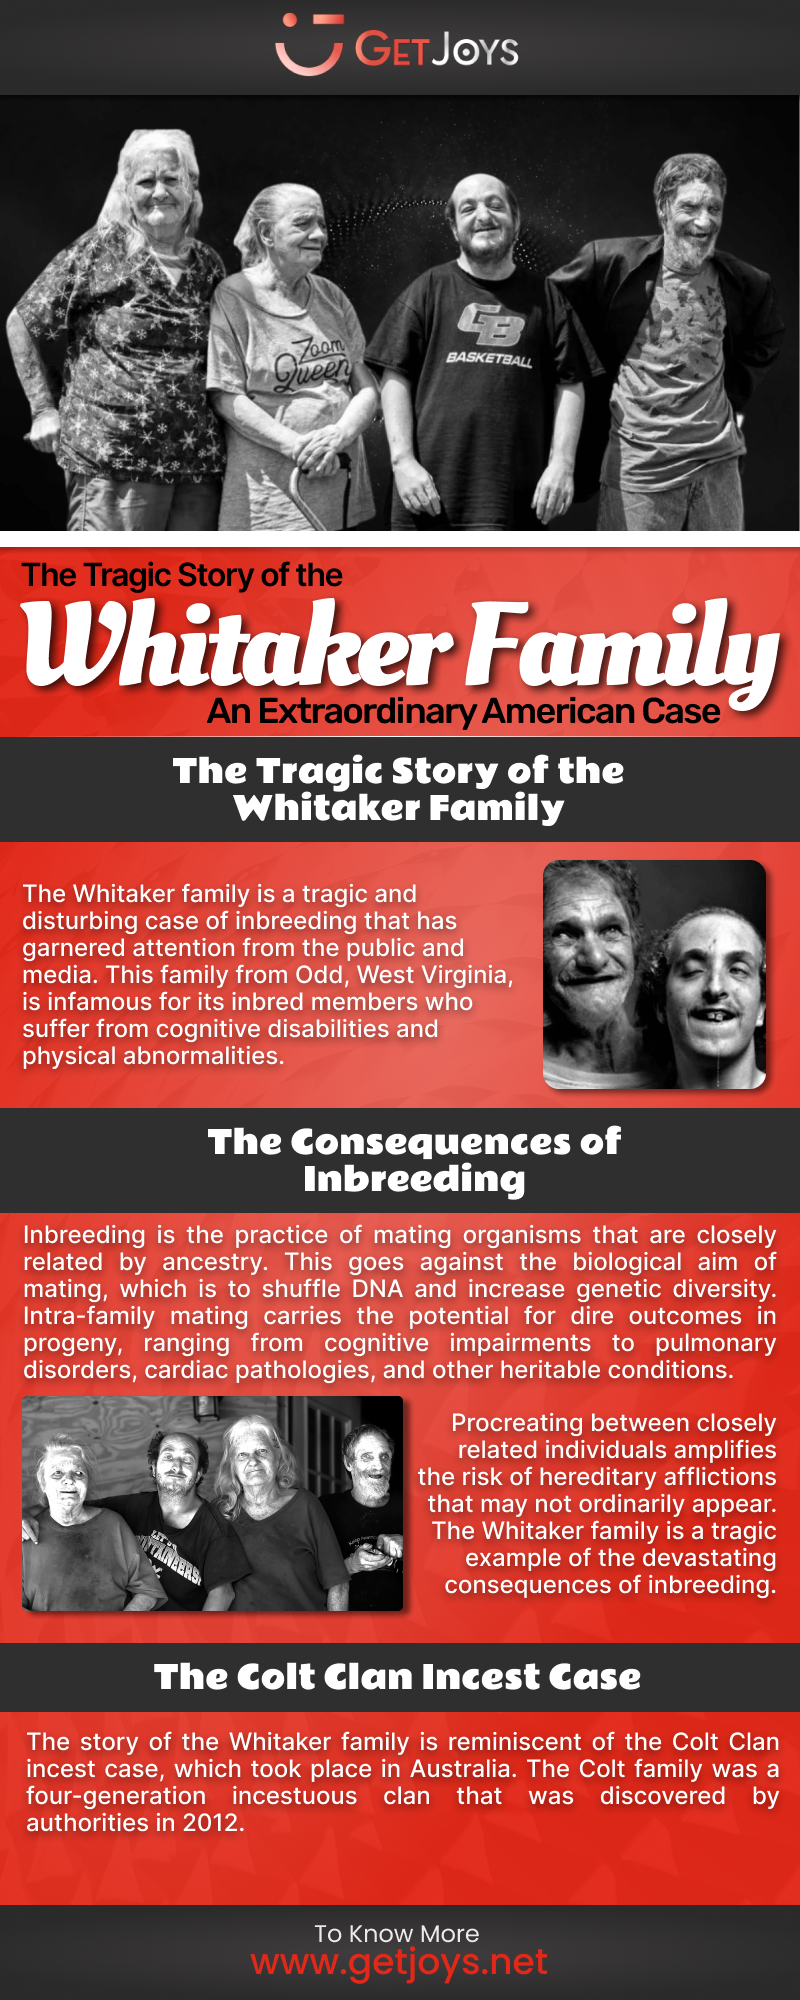 The Tragic Story of the Whitaker Family by Get Joys on Dribbble